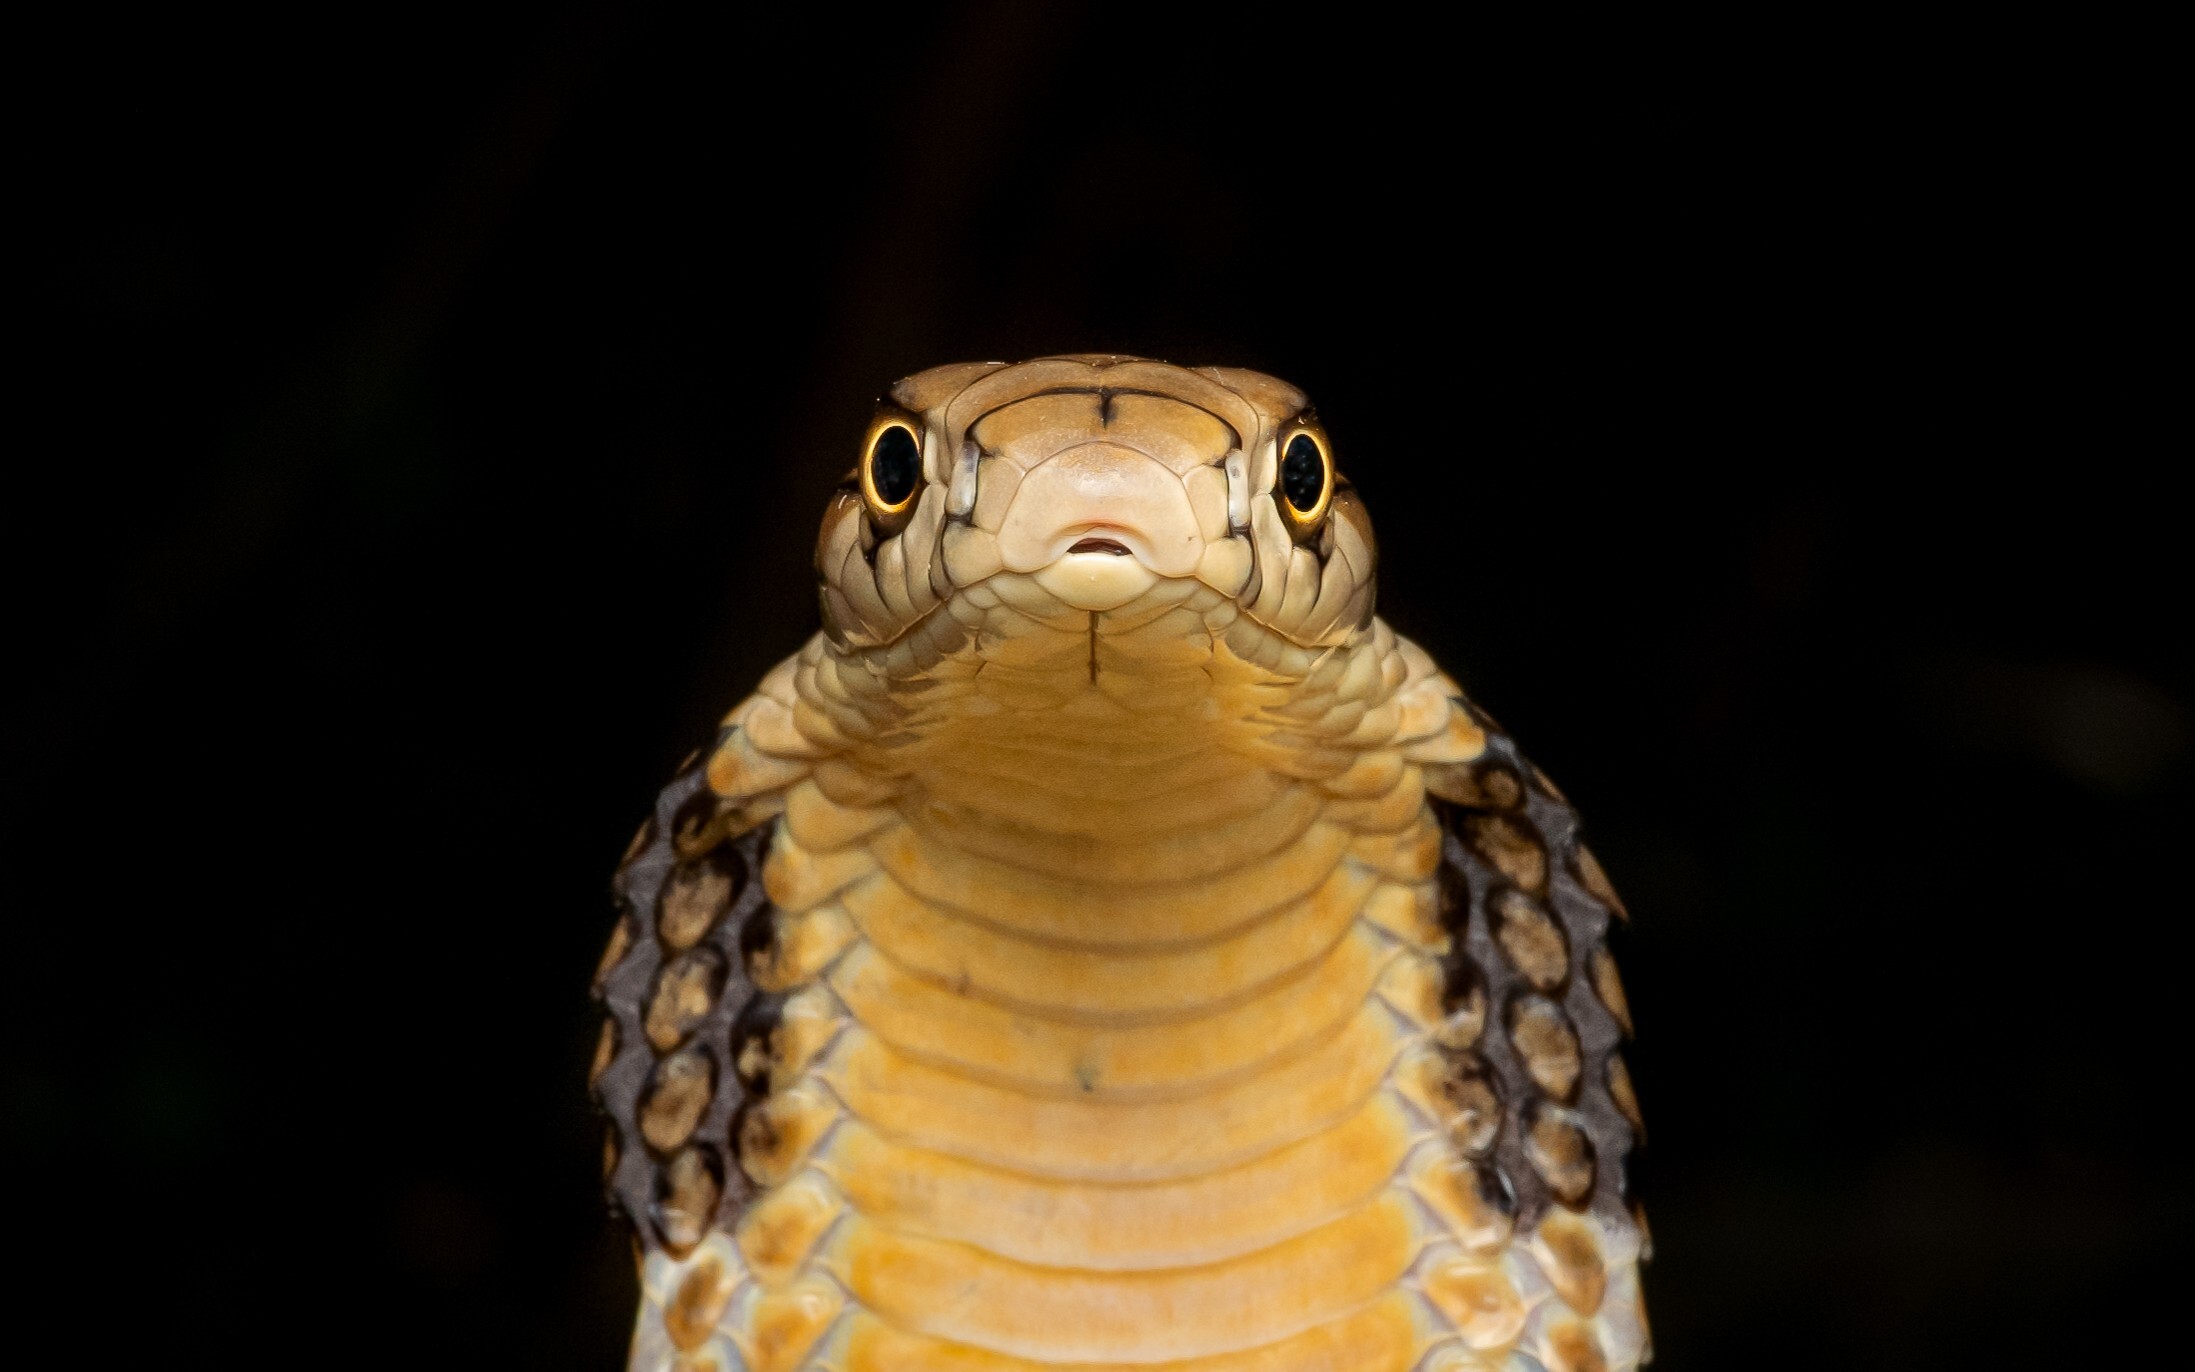 Adam Francis won the Hong Kong Snakes competition with this photo of a king cobra. Photo: Adam Francis